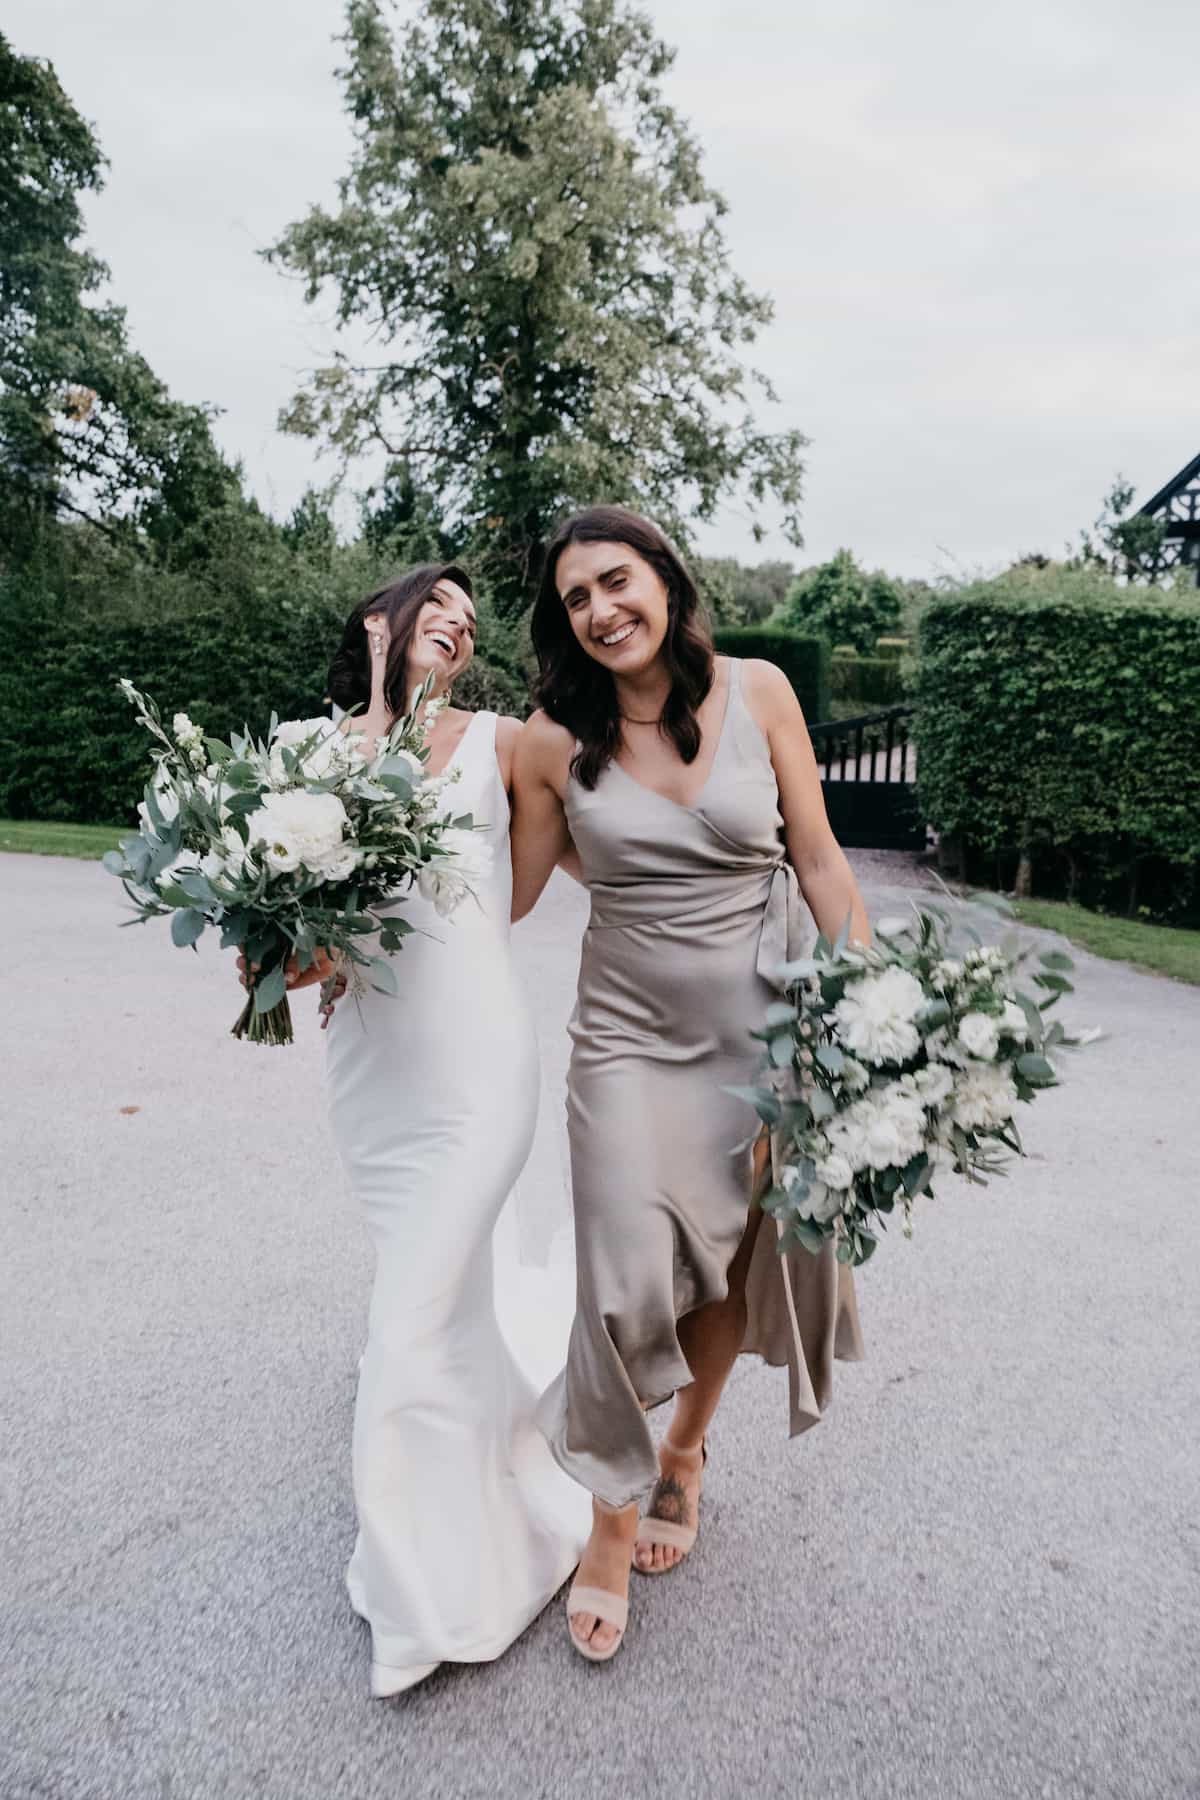 A bride and bridesmaid holding white bouquets